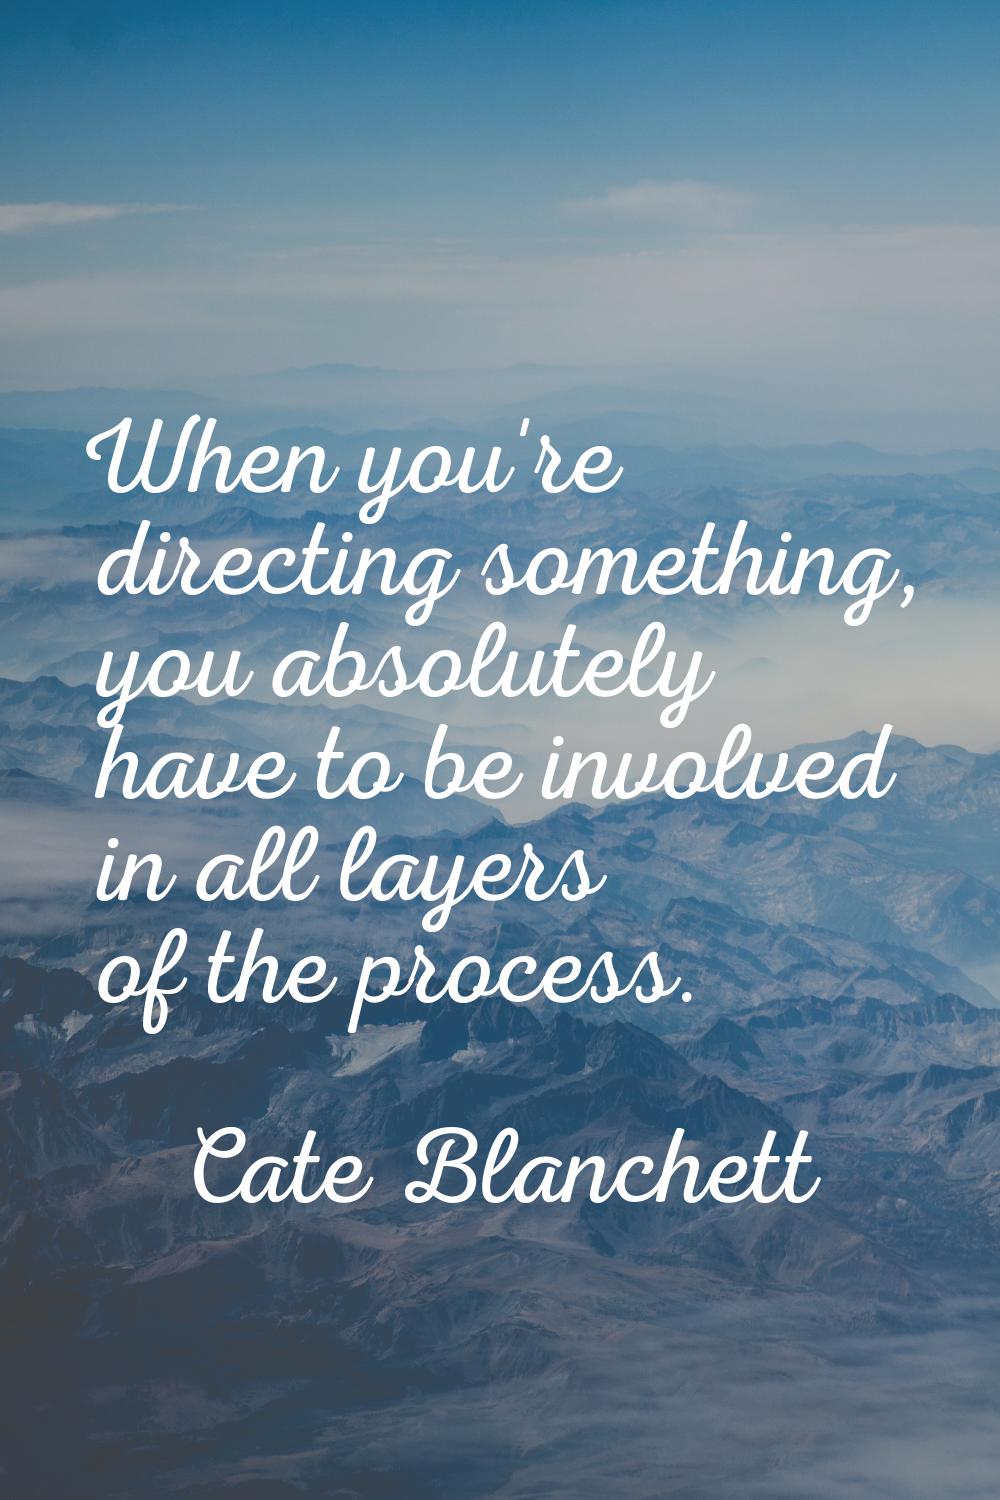 When you're directing something, you absolutely have to be involved in all layers of the process.